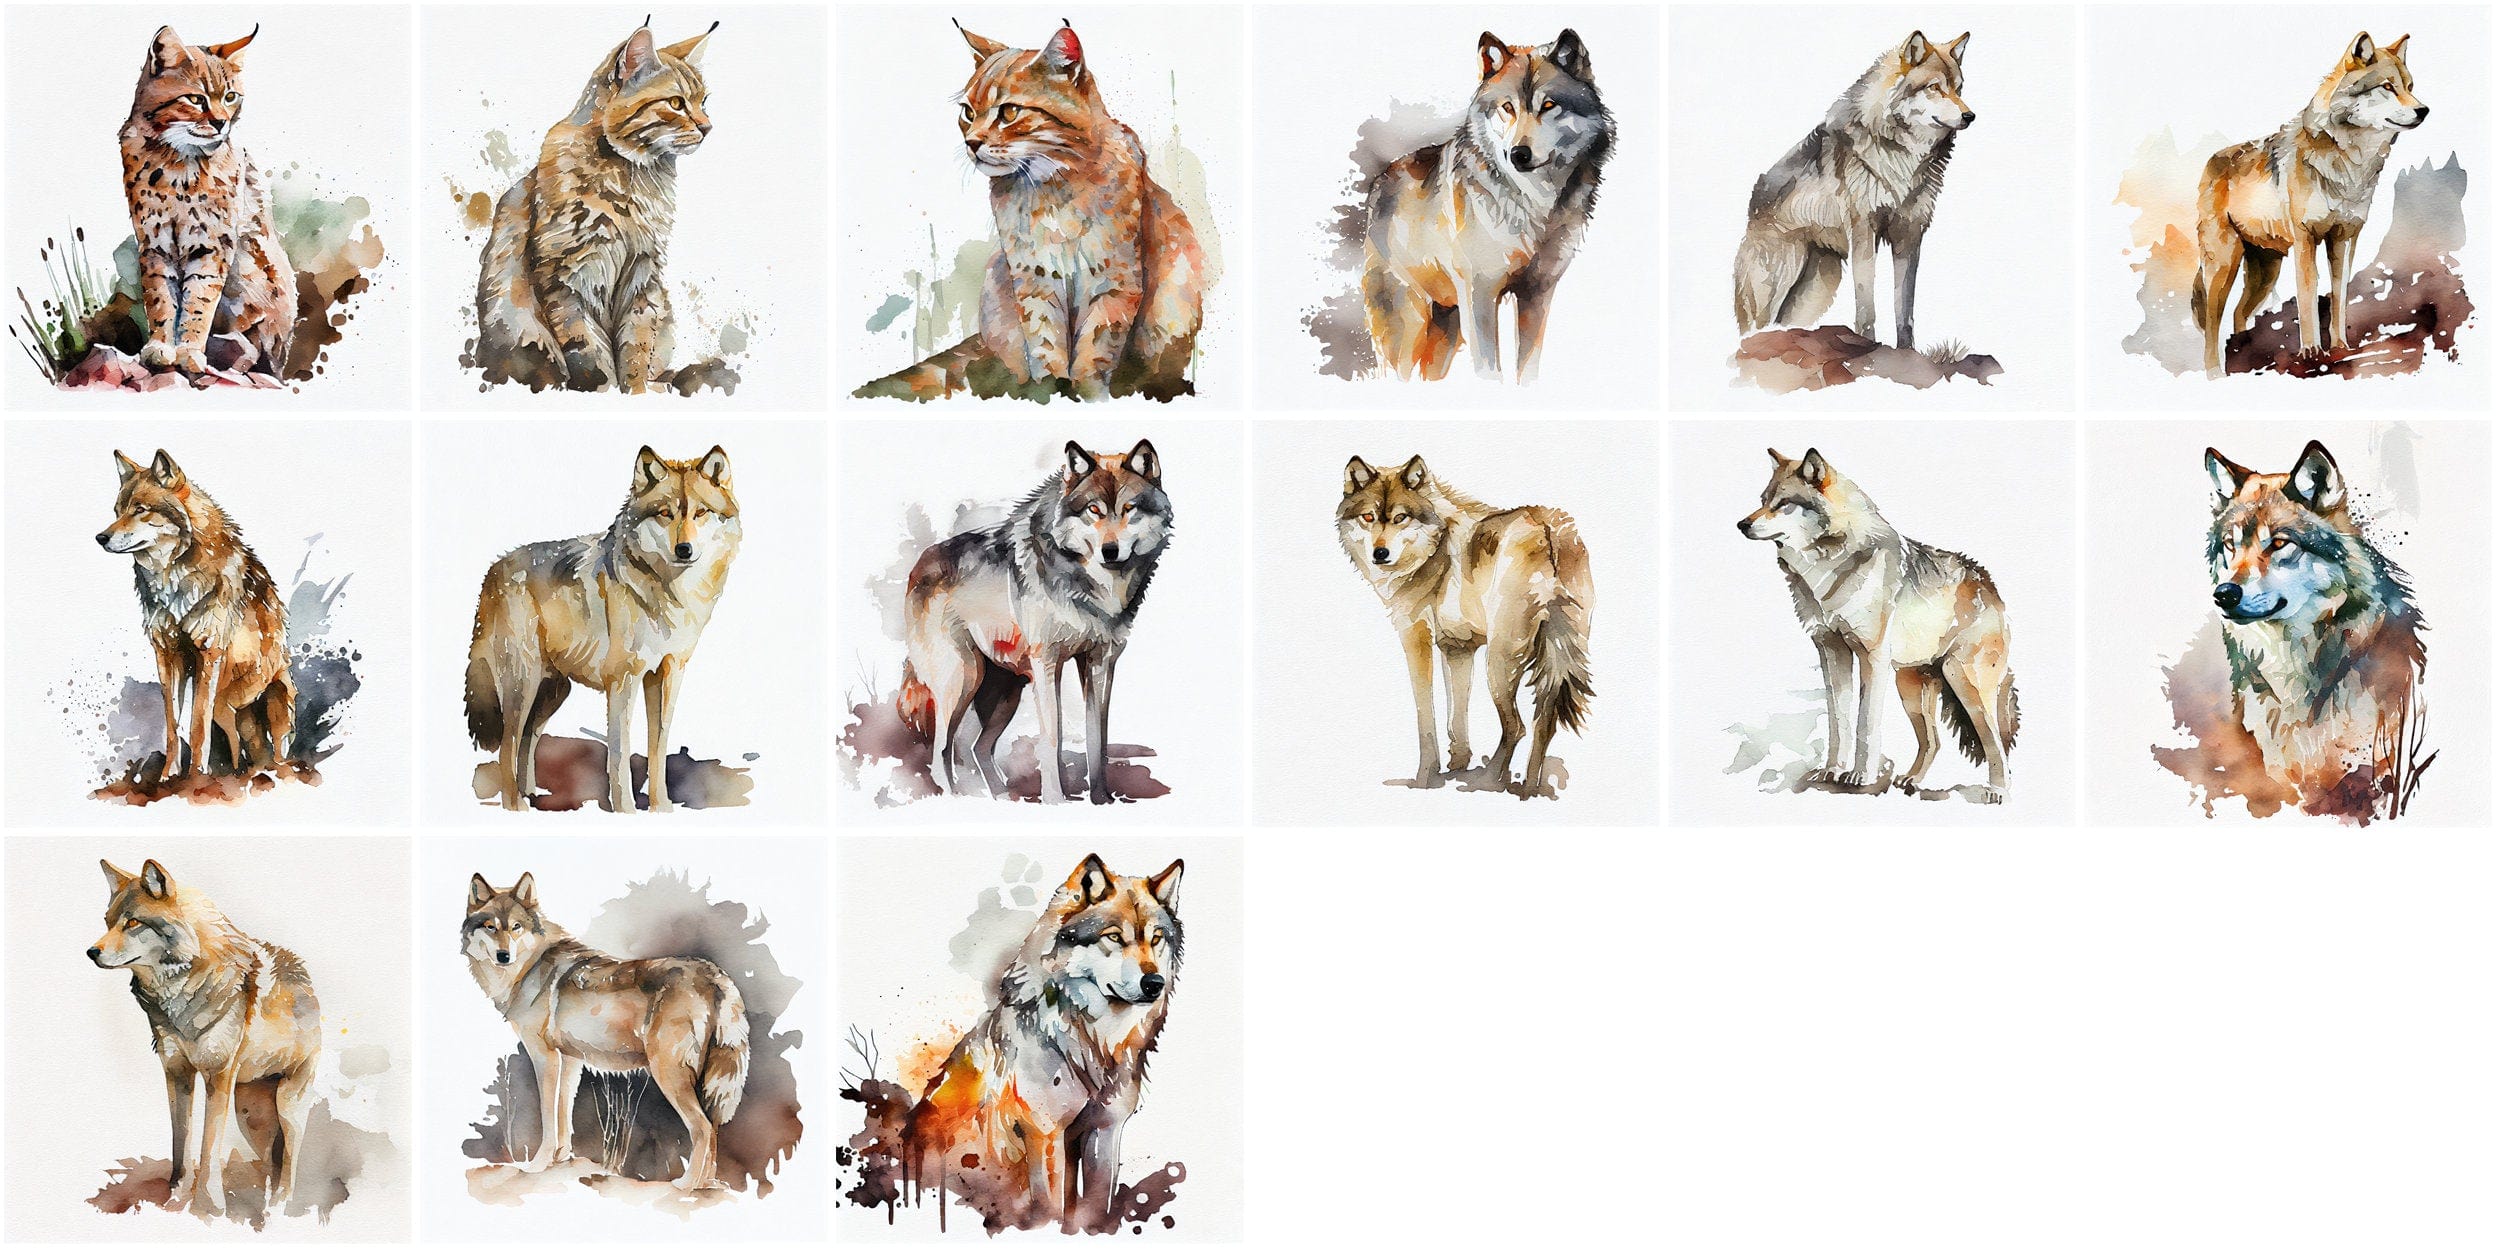 290 Watercolor Animal Images Perfect for DIY Crafts, Projects and Sublimation, Transparent Watercolor Animals, PNG animals, Clipart animals Digital Download Sumobundle